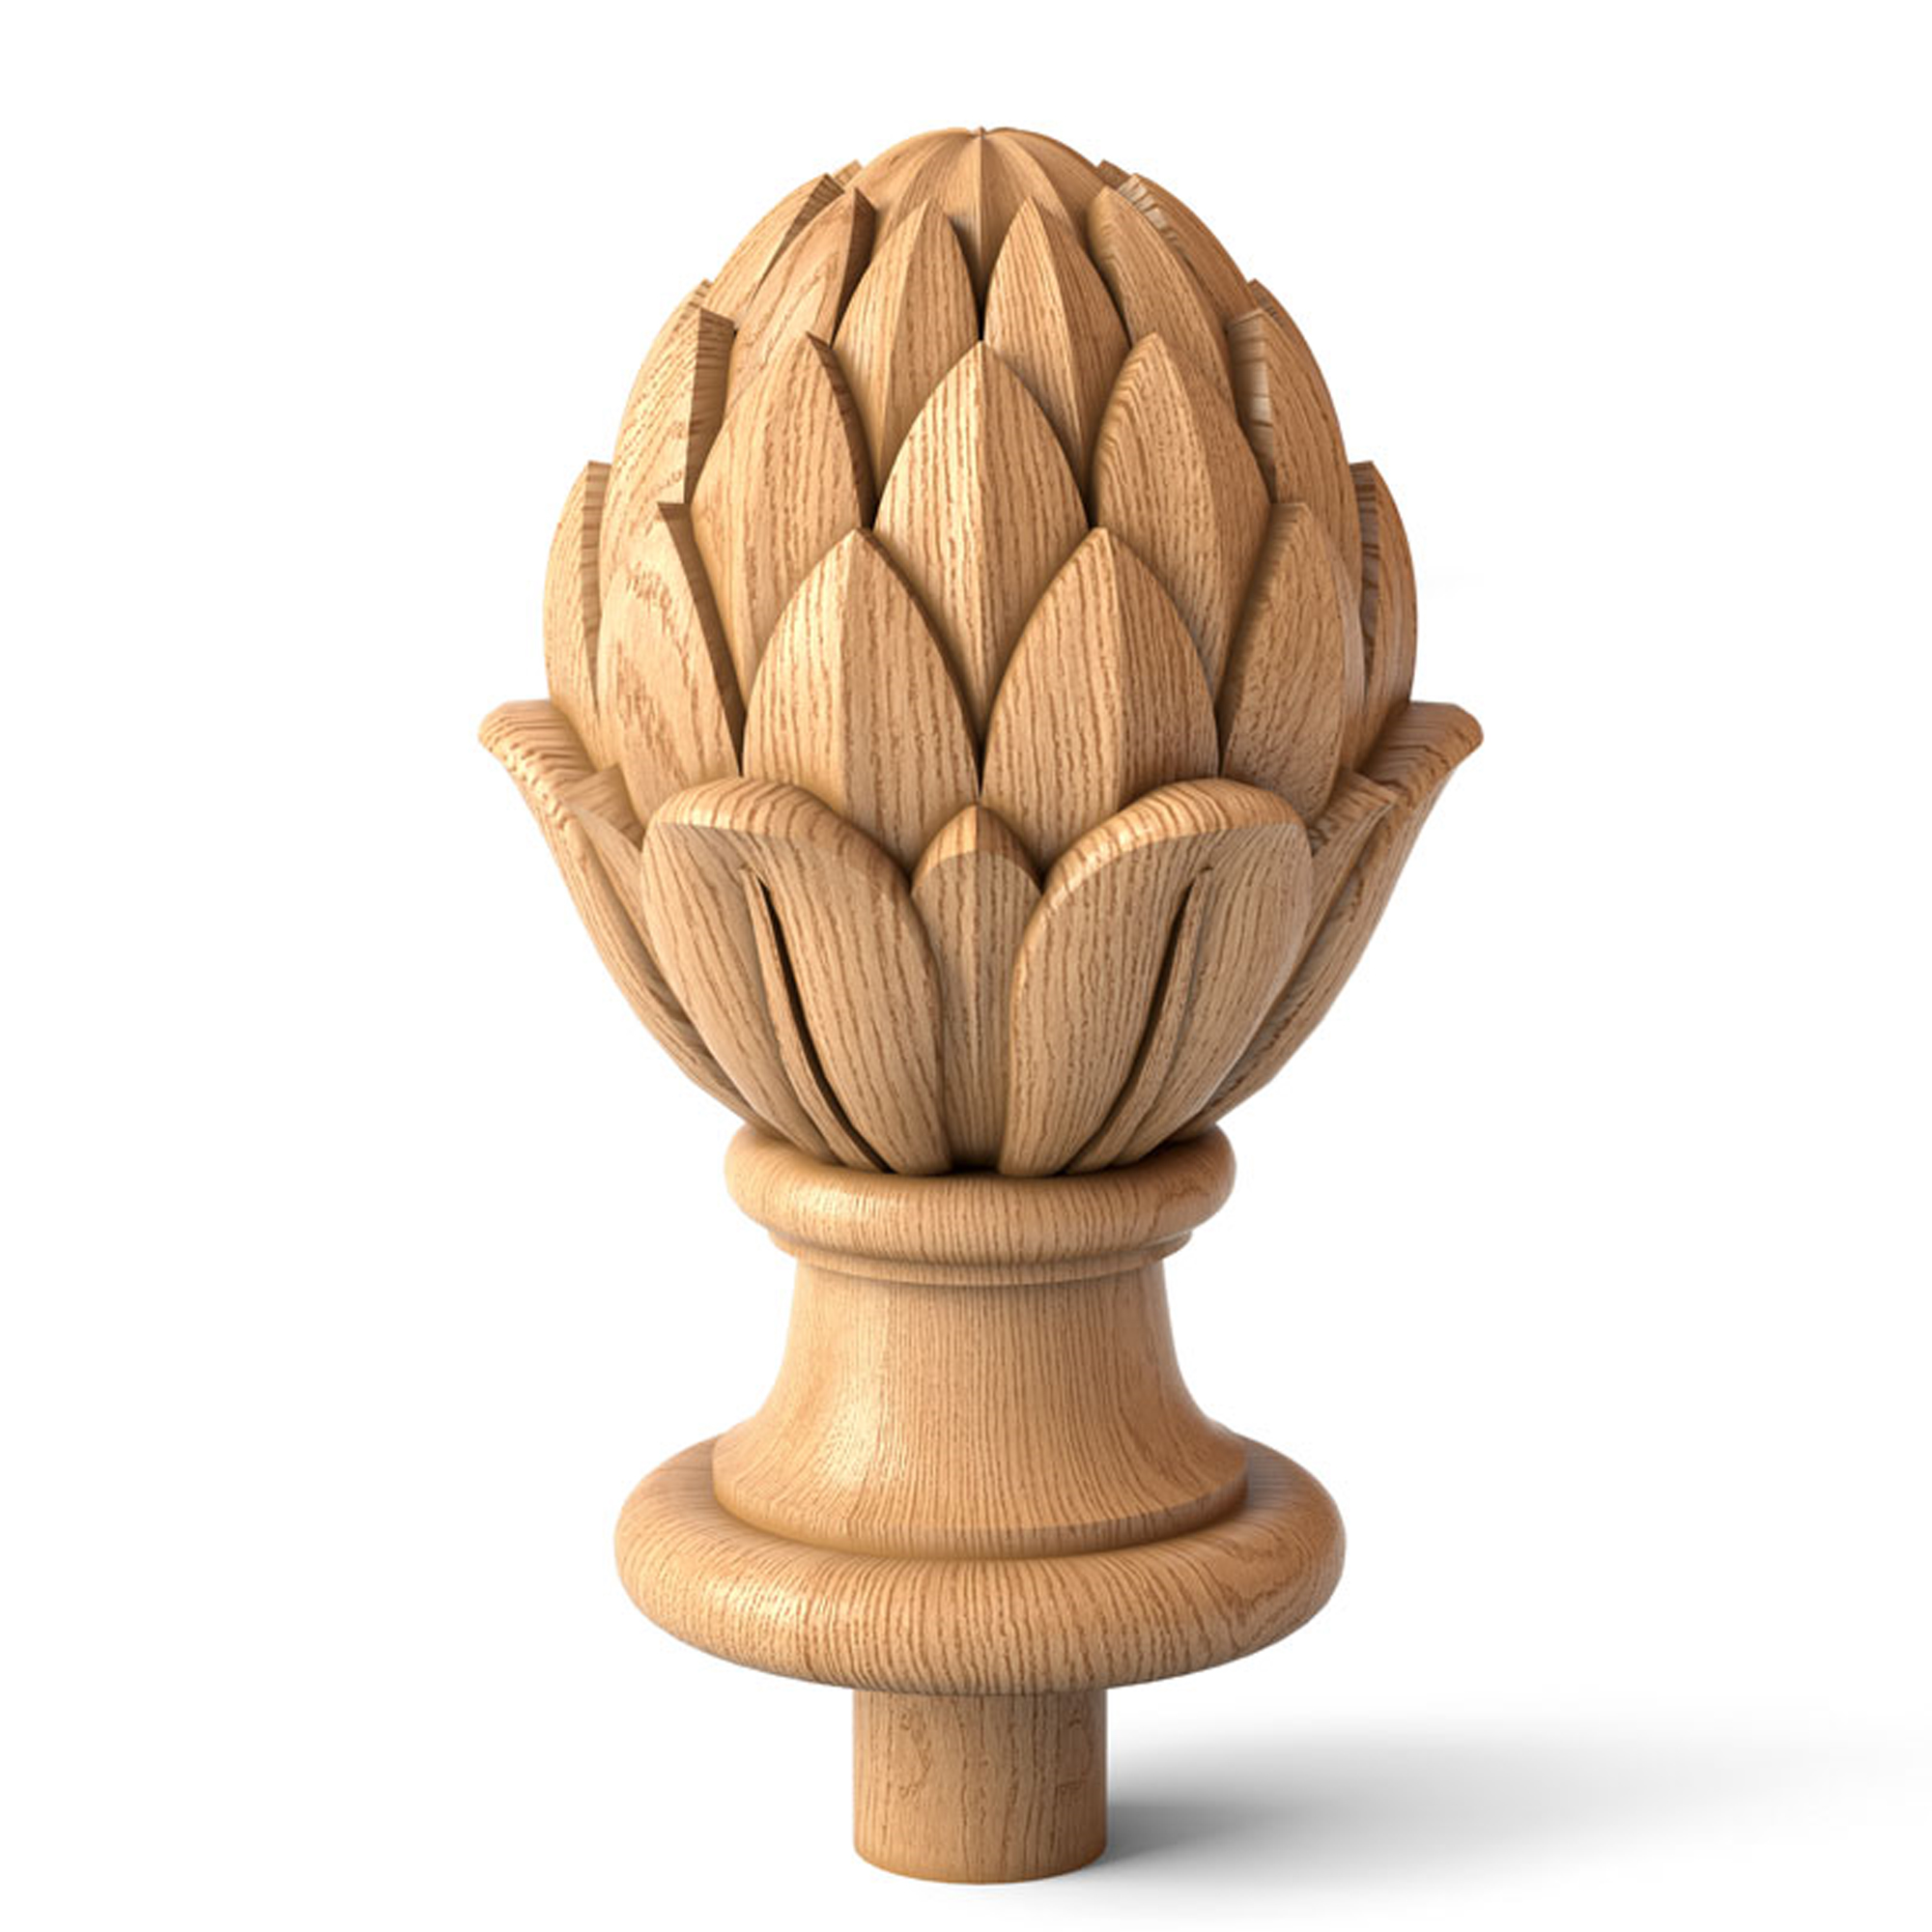 Classic oak newel post cap, Unfinished carved finial